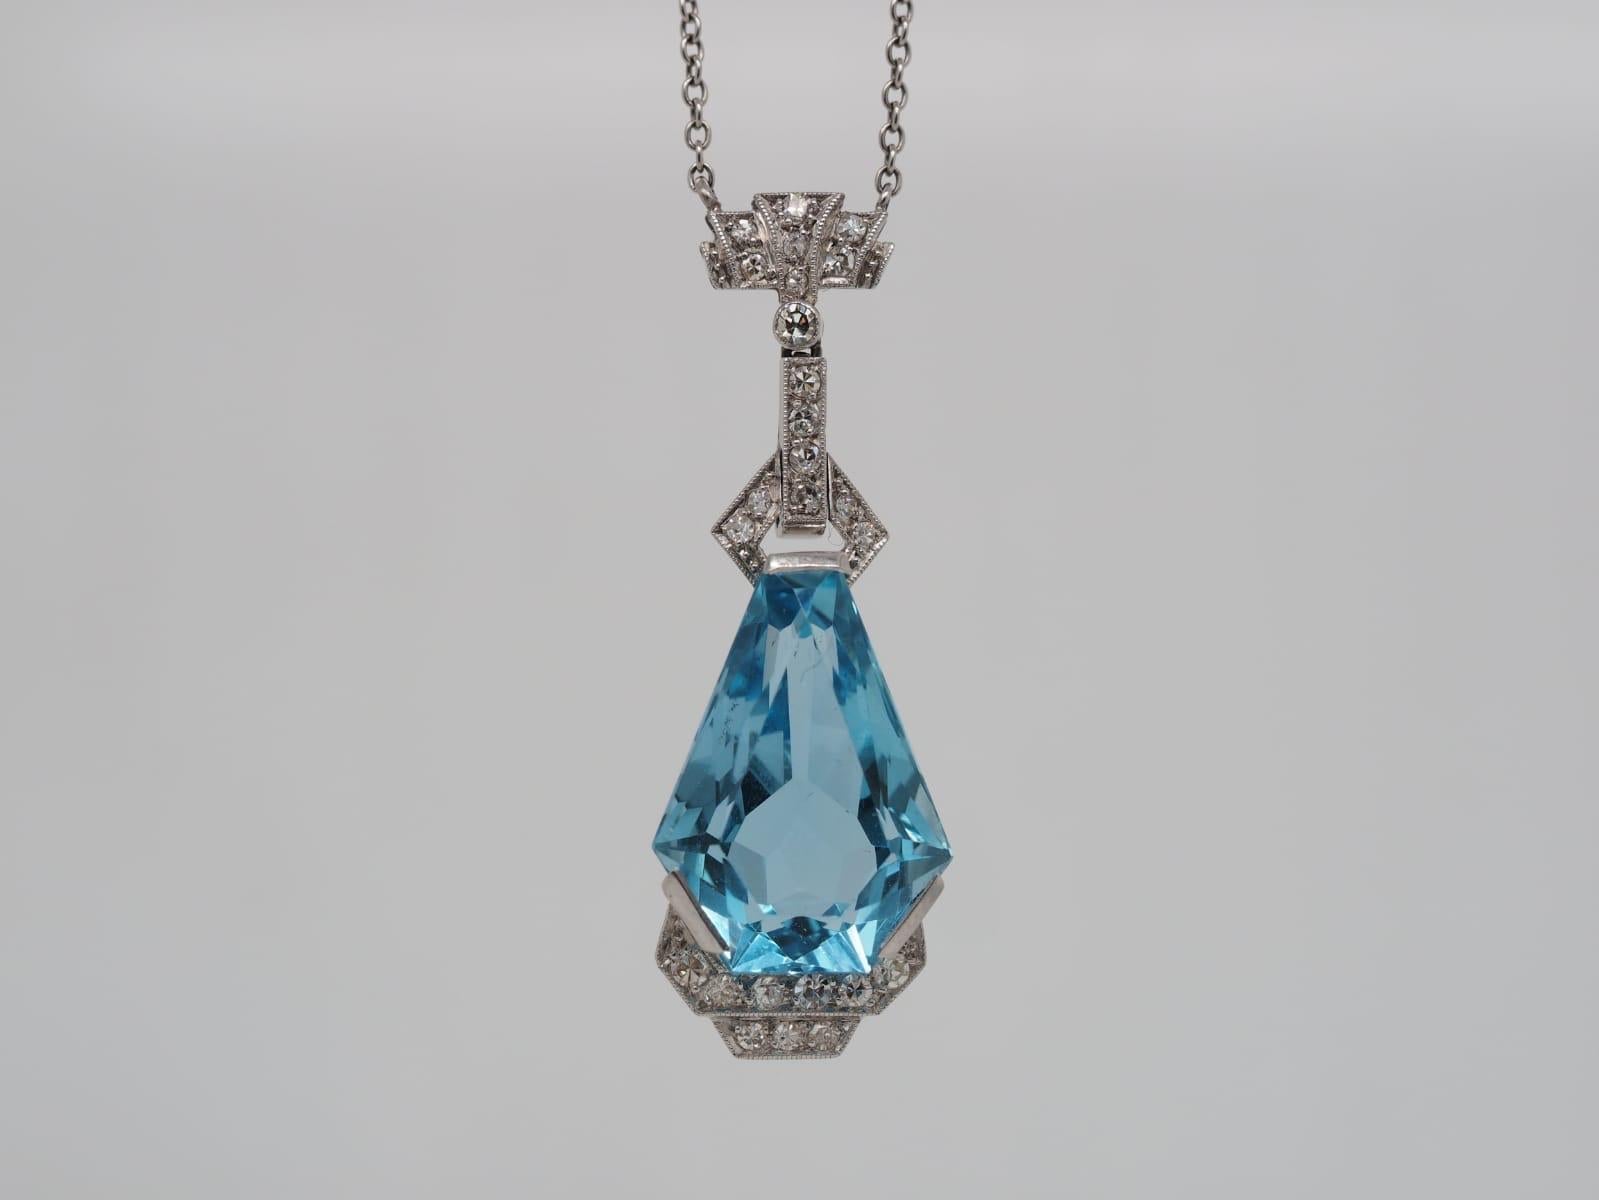 This True Vintage Art Deco Coffin Cut Aquamarine Dangle Necklace is a one of a kind. Its unique geometric shape is admirable and eye catching. The bold blue aquamarine center weighs 10.00 carats and measures 18.56 x 13.30 x 7.36 MM. The aquamarine